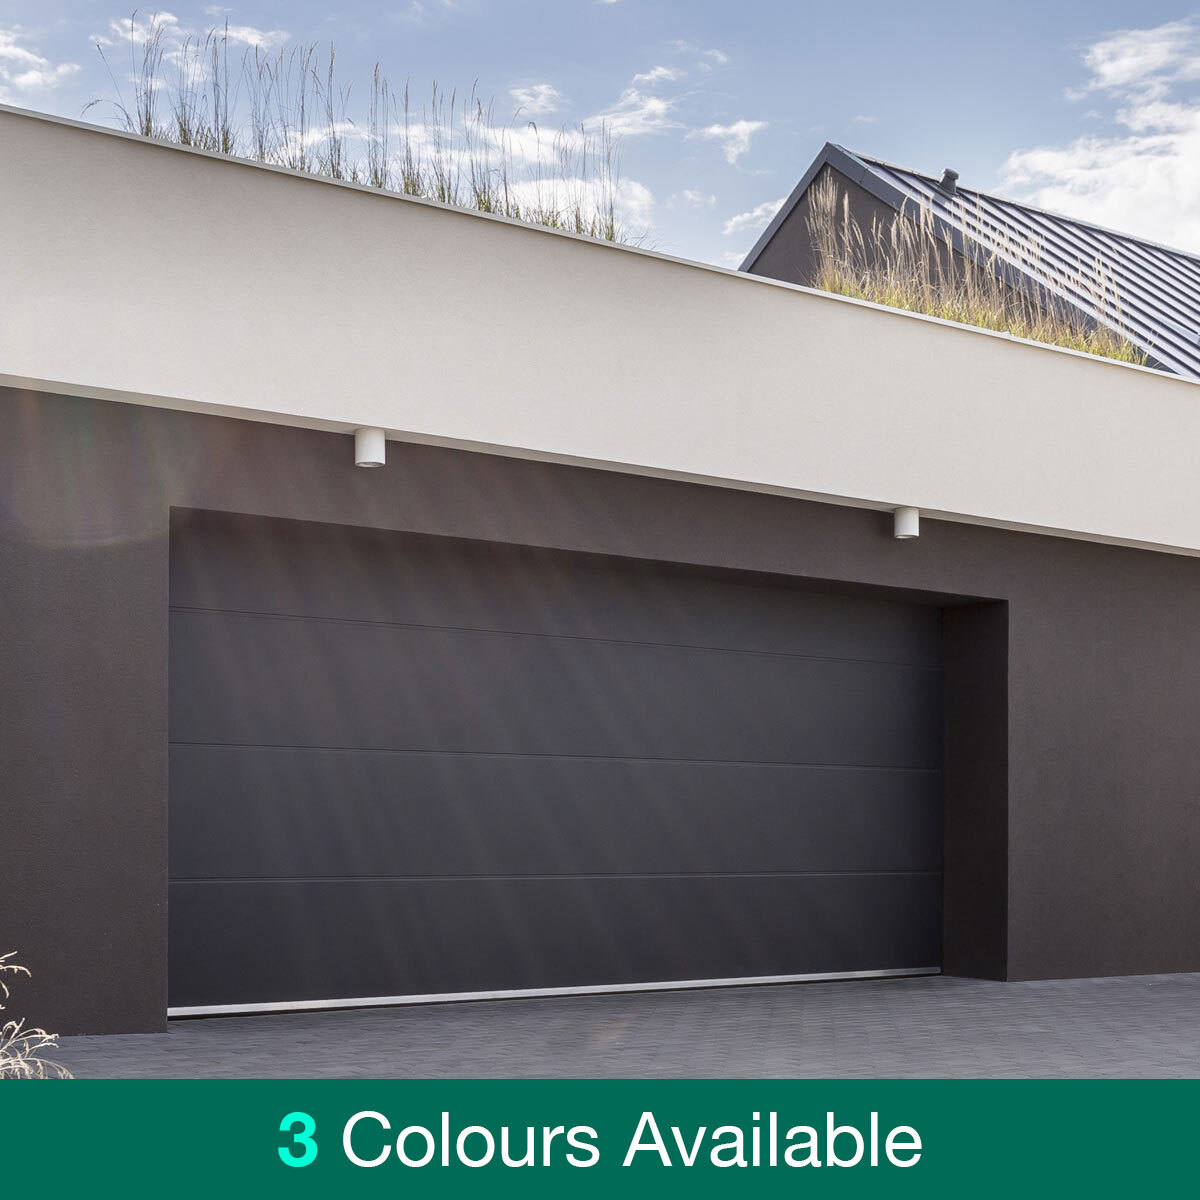 Birkdale Automatic Sectional Garage Door with Installation up to 2.5m Wide 